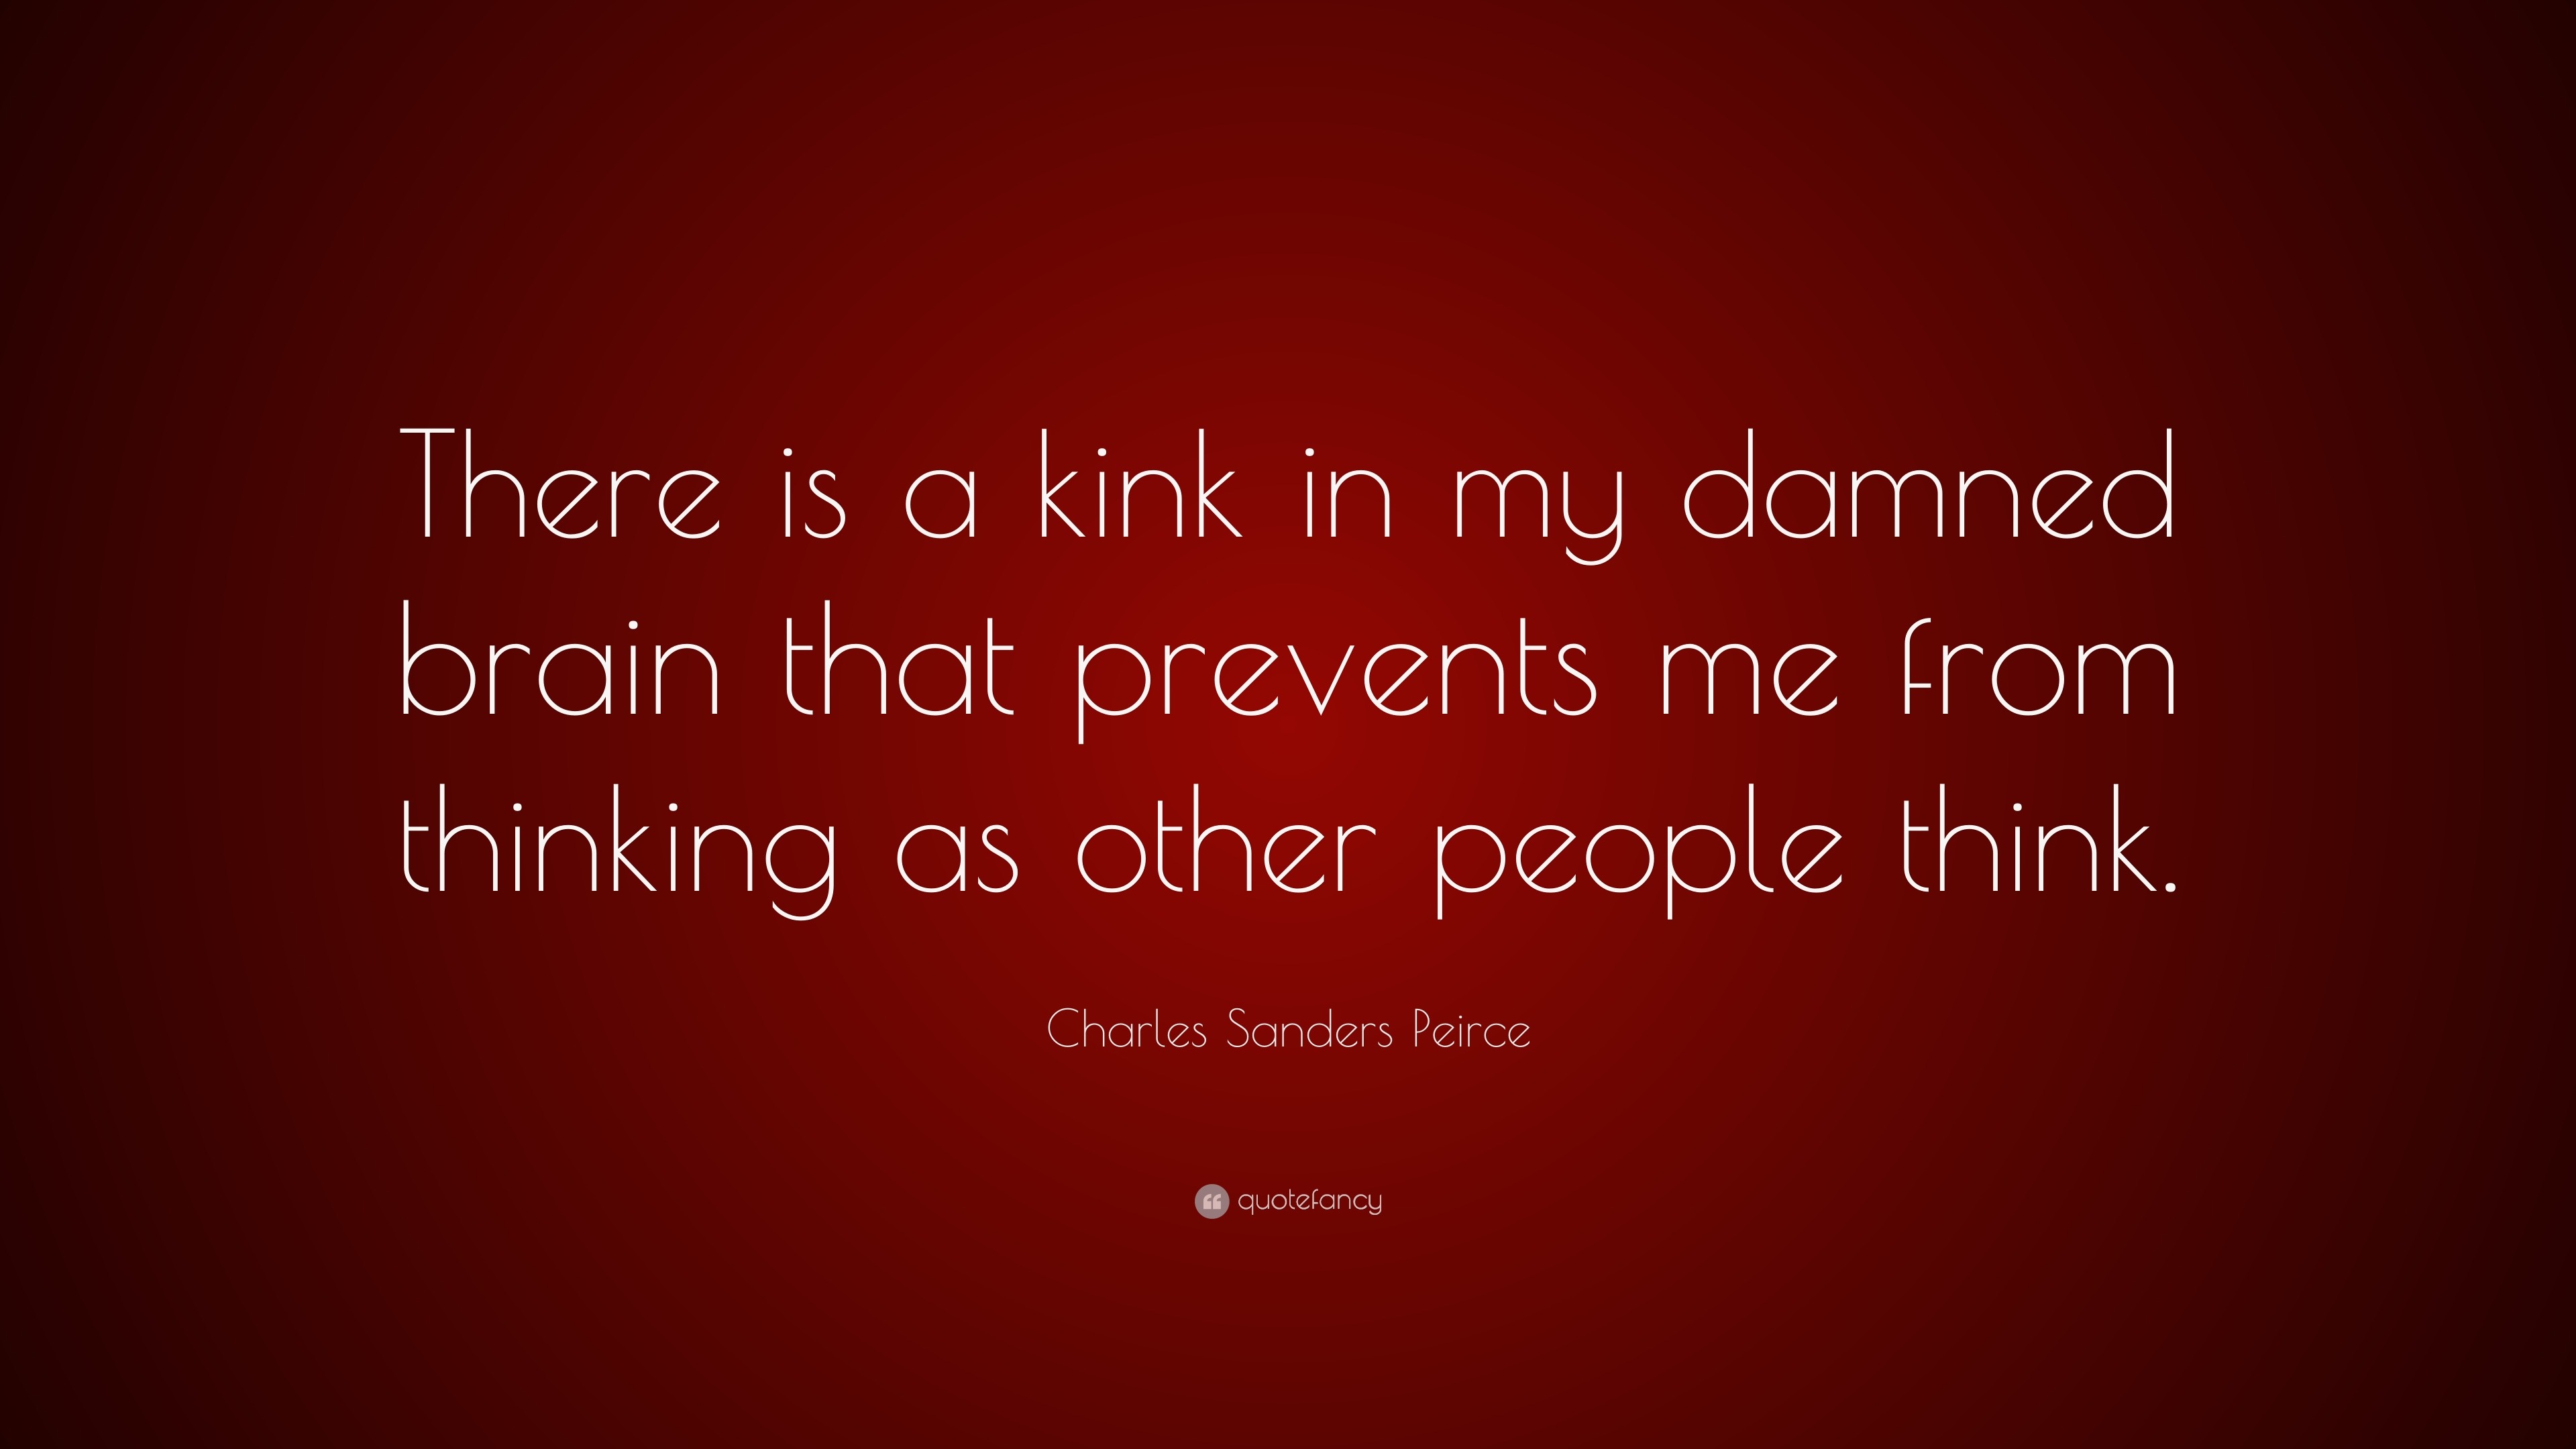 Charles Sanders Peirce Quote: “There is a kink in my damned brain that  prevents me from